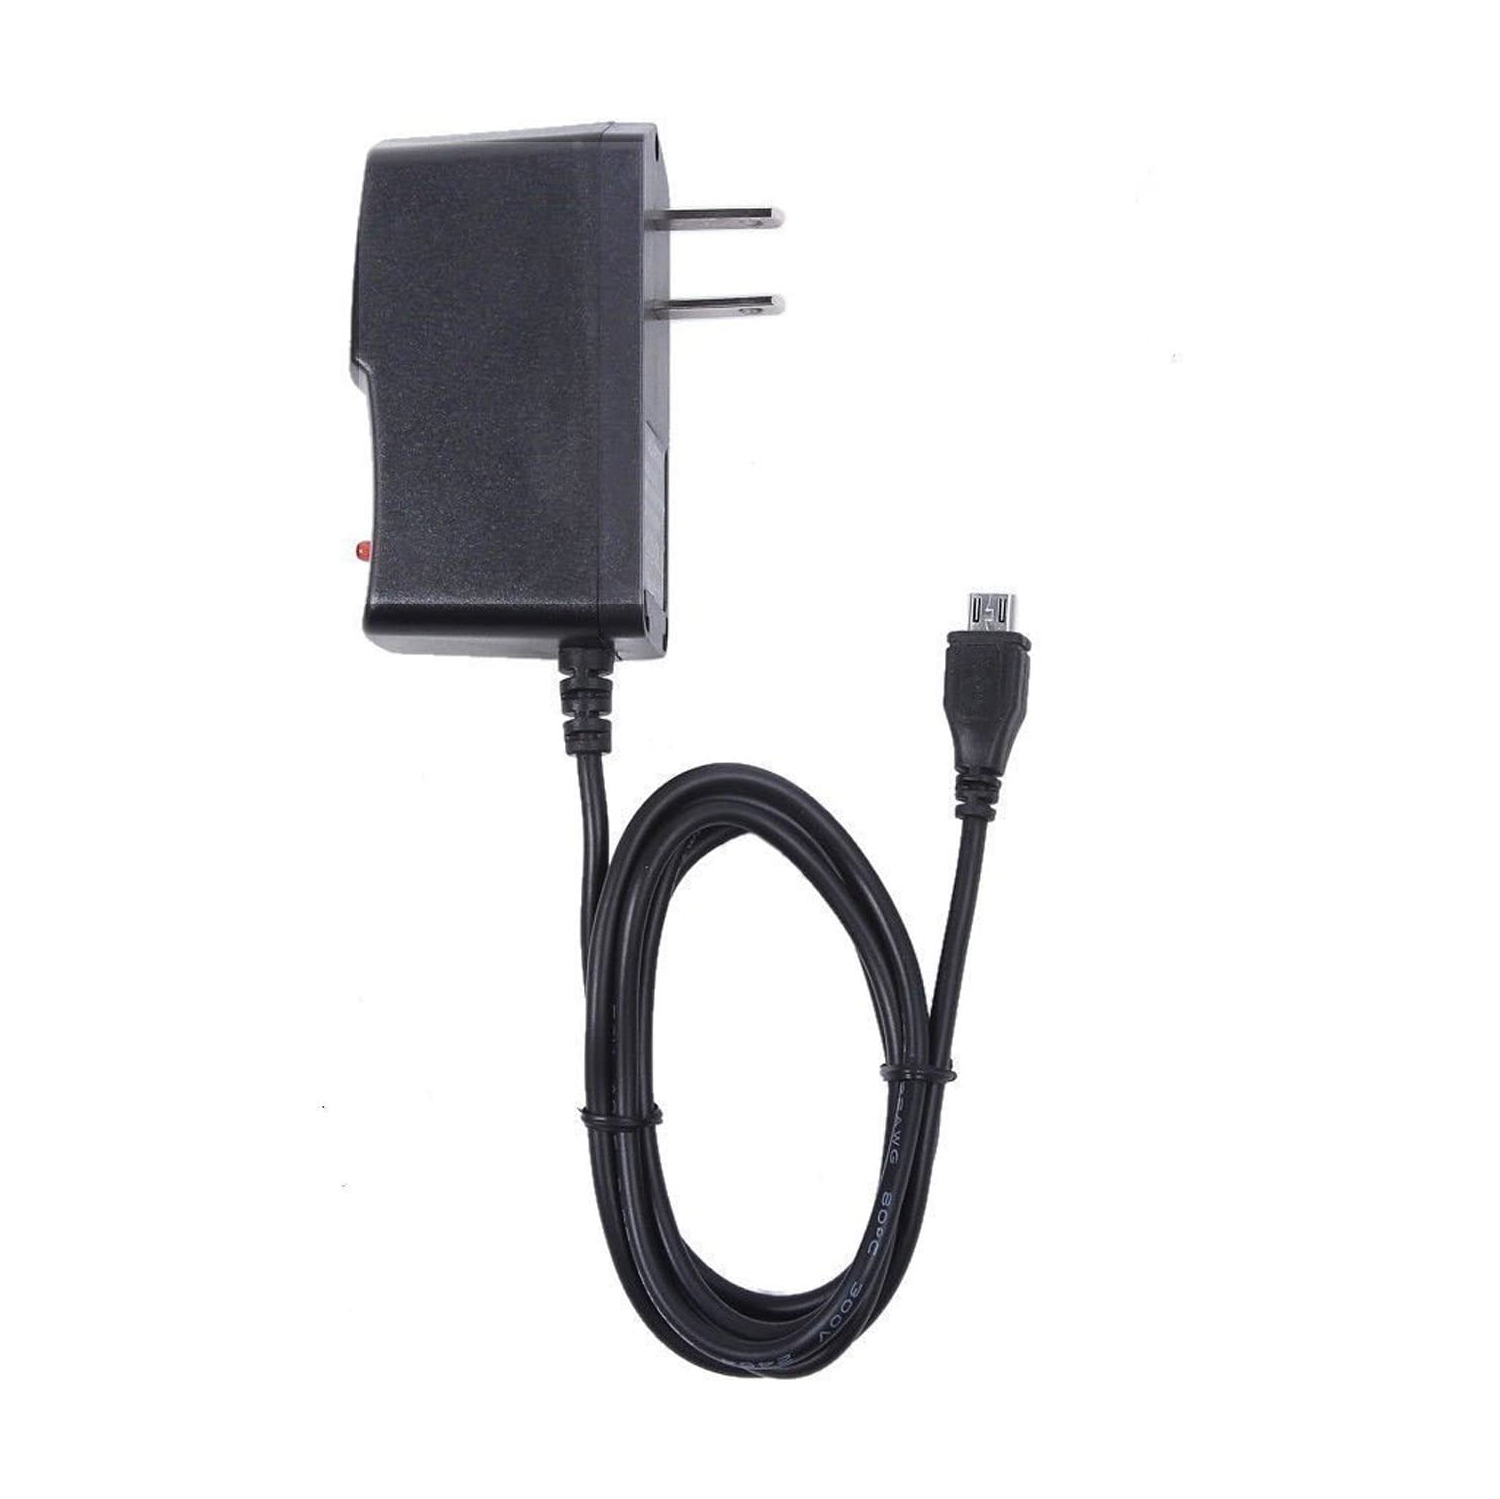 MaxLLTo® 2A AC/DC Wall Power Charger Adapter for ASUS Transformer Book T100 TA Tablet PC